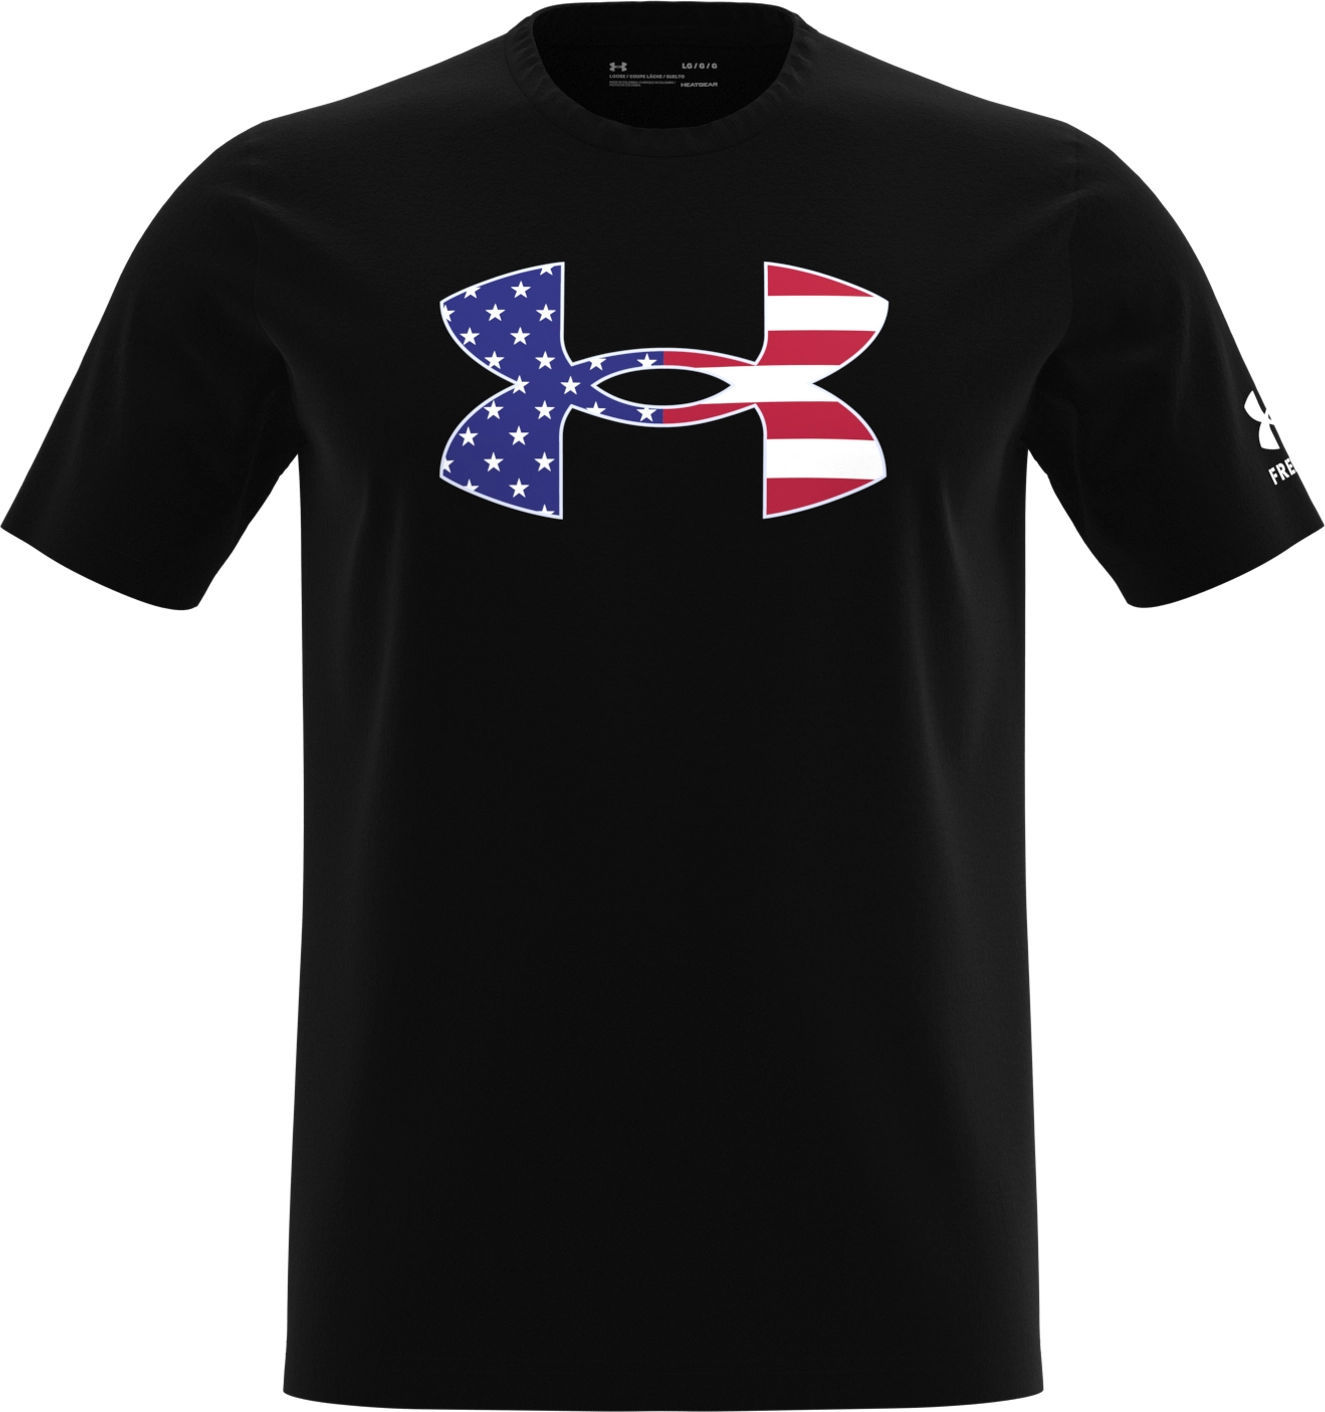 E167445 Under Armour Men's New Freedom BFL T-Shirt 1370824